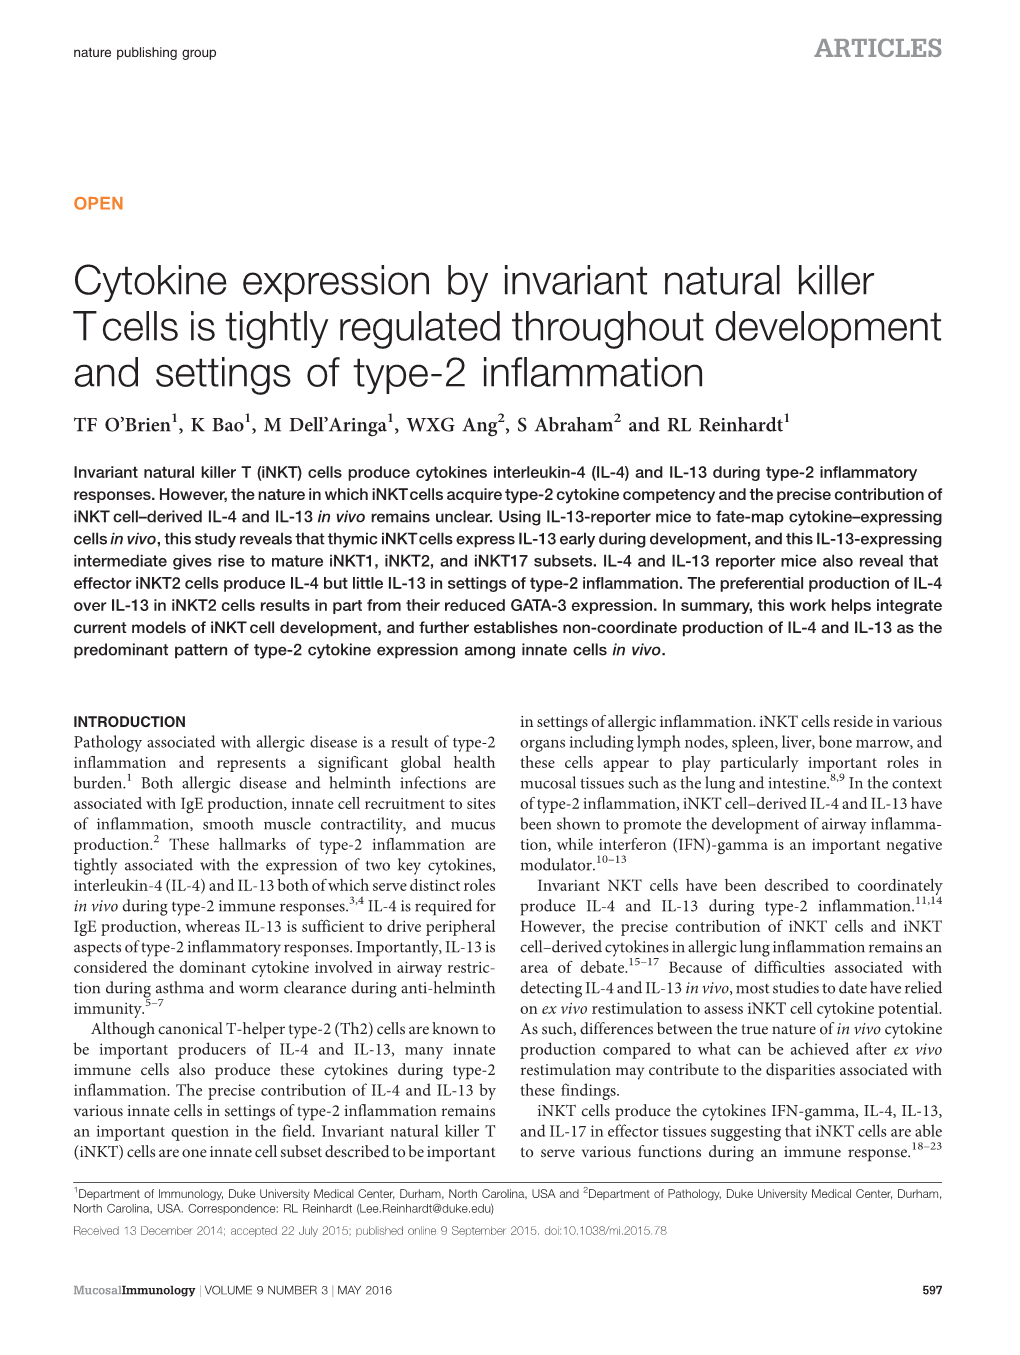 Cytokine Expression by Invariant Natural Killer T Cells Is Tightly Regulated Throughout Development and Settings of Type-2 Inflammation